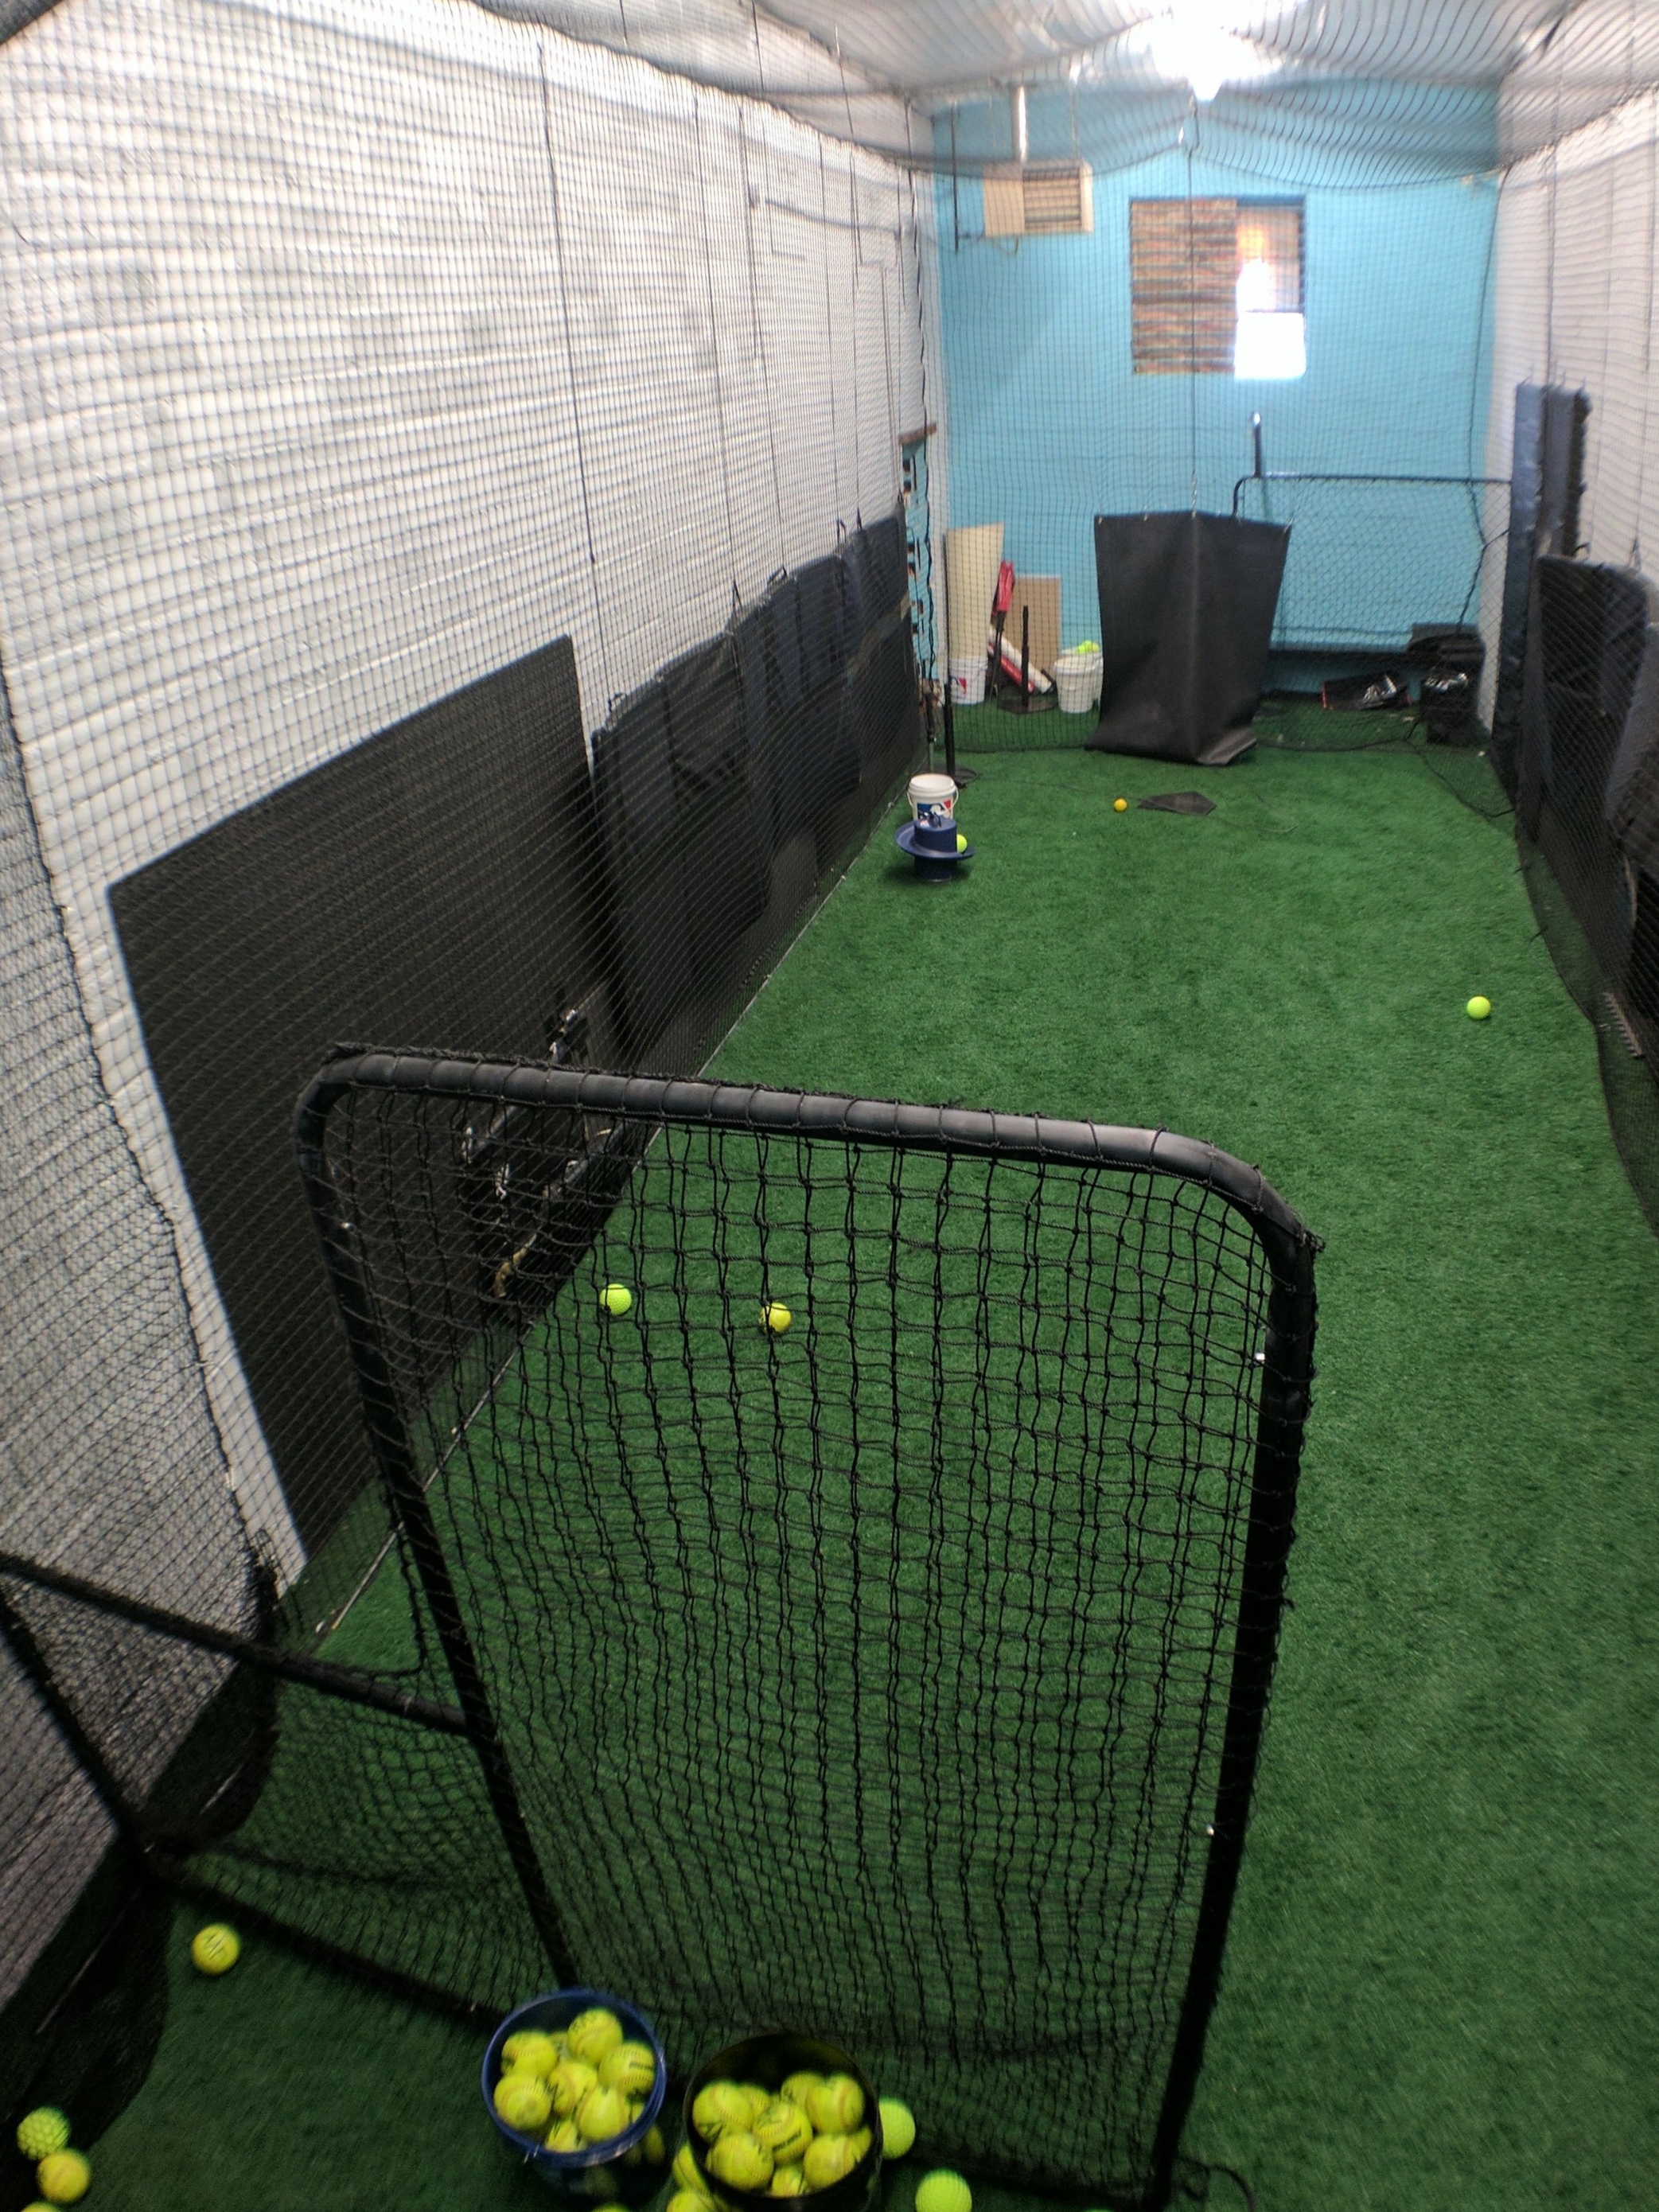 Great for Softball, Soft Toss, or Tee Work